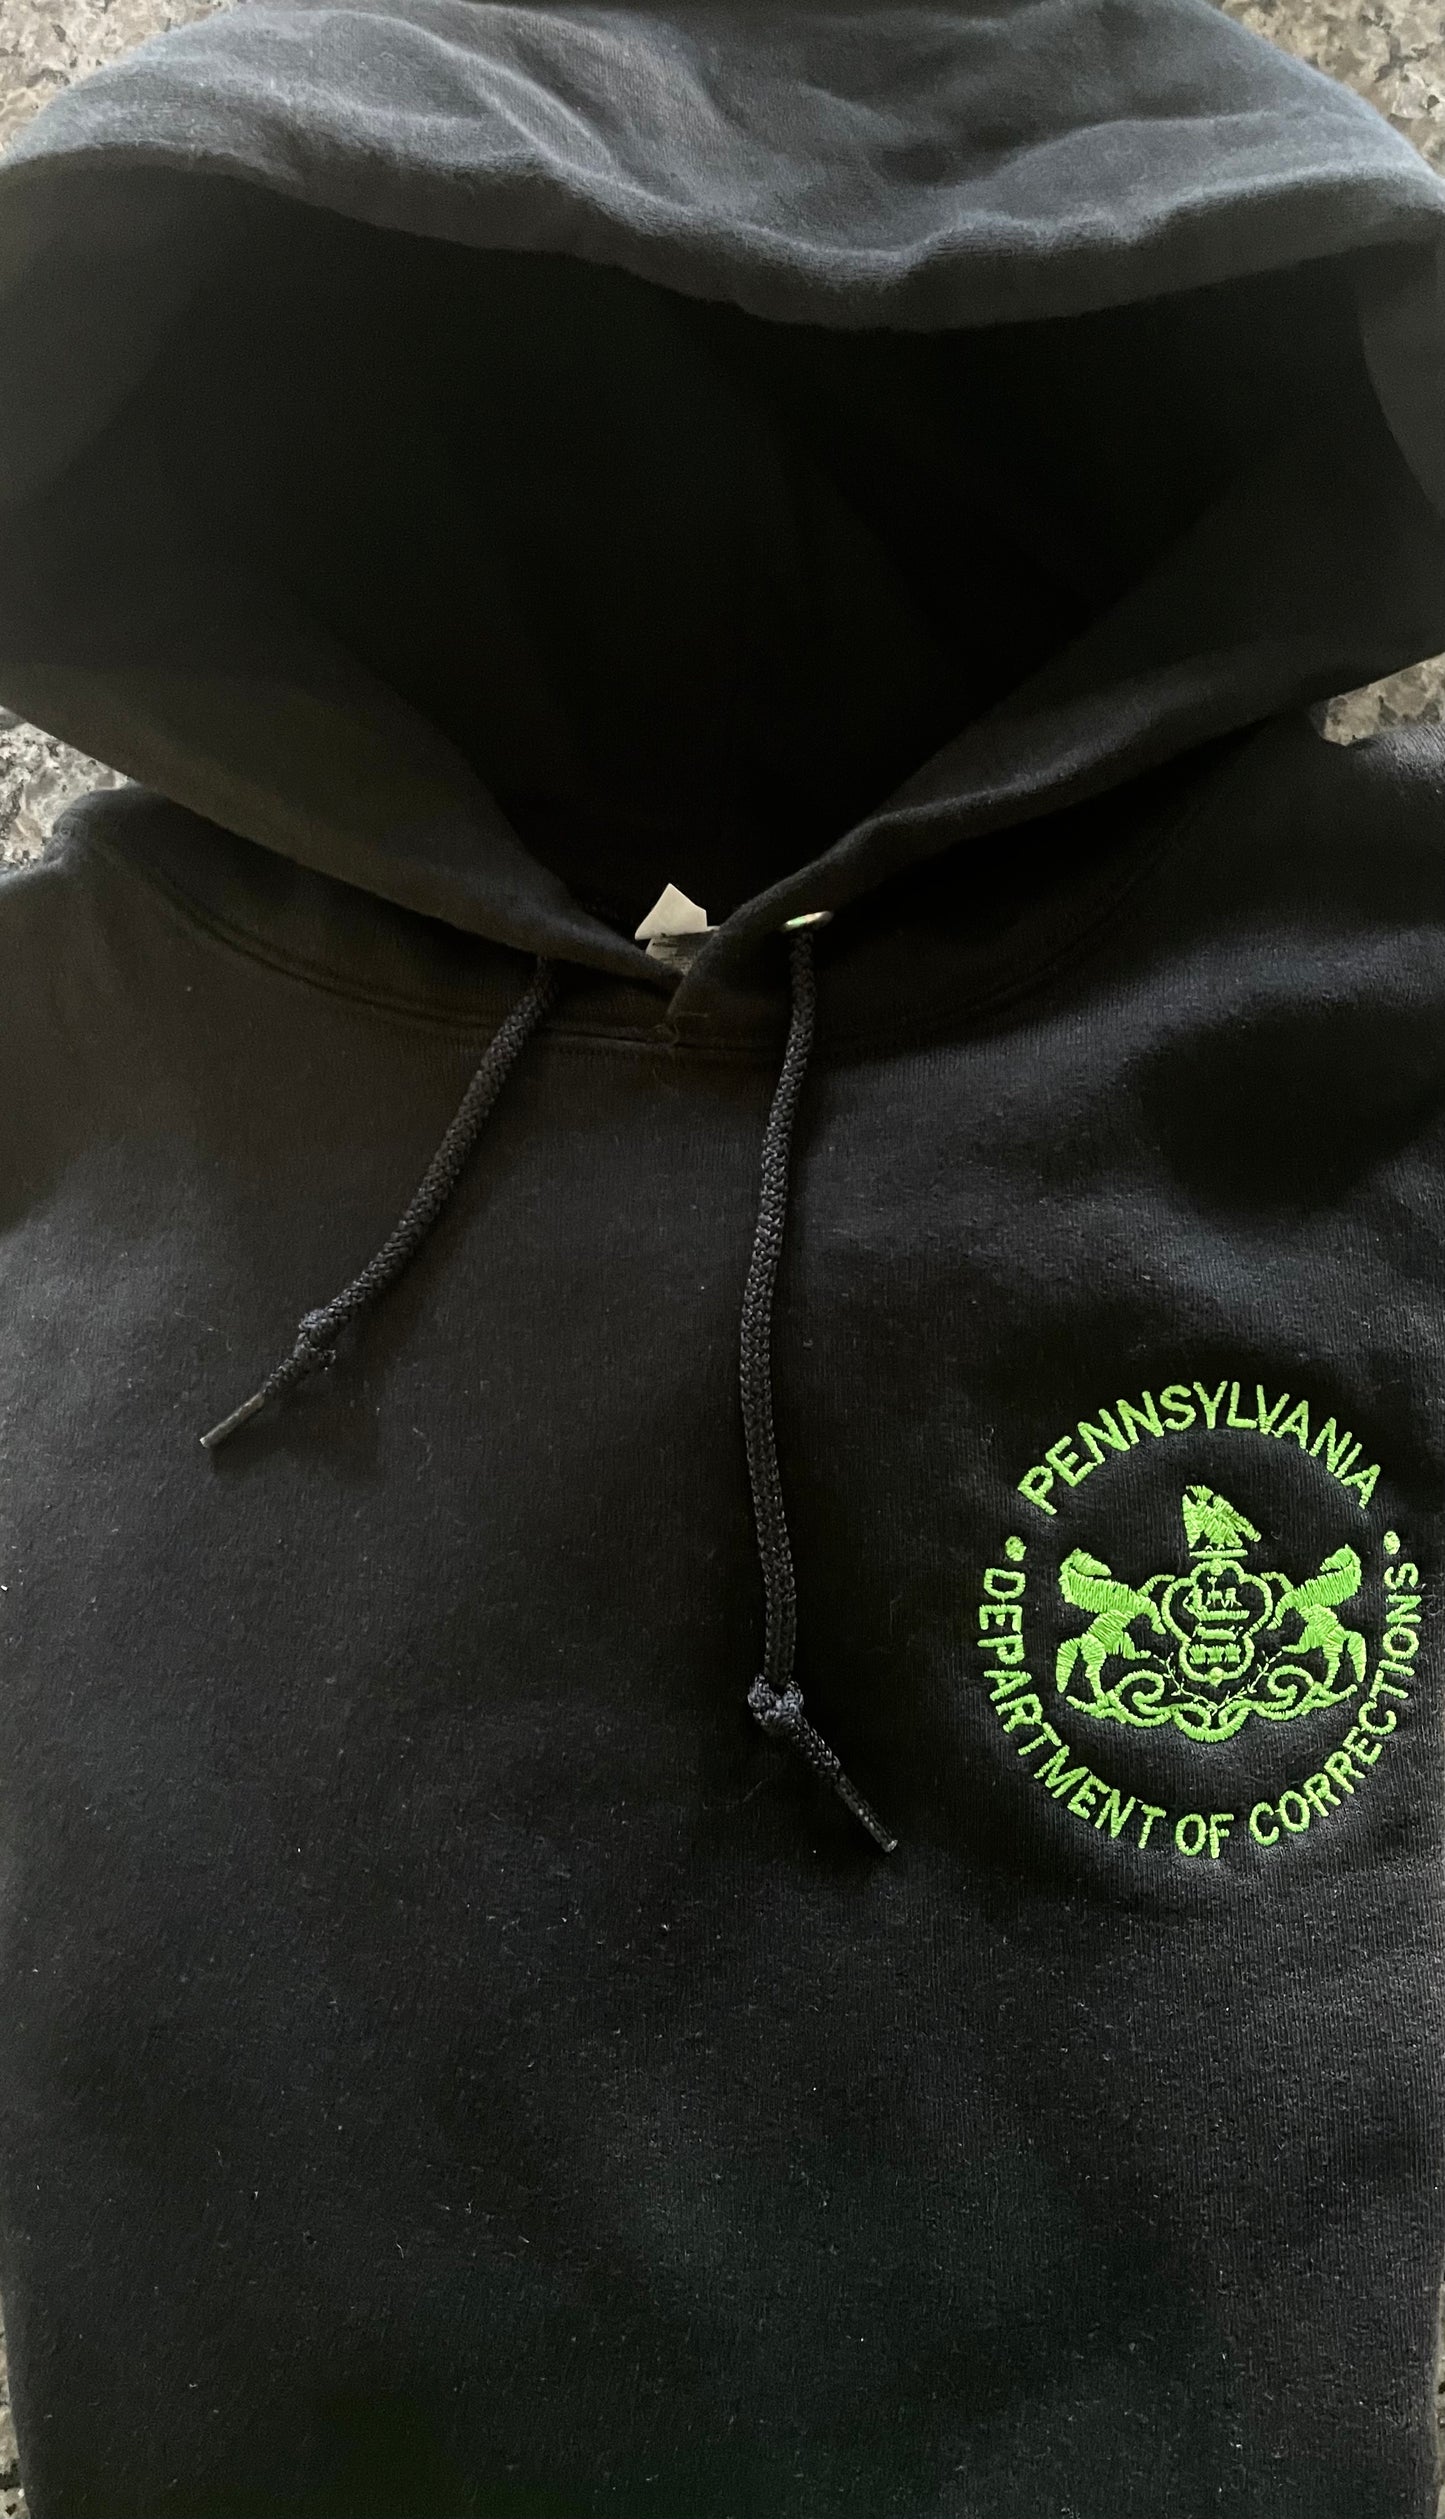 LIMITED EDITION Halloween Hooded Sweatshirt with Embroidered Department of Corrections Logo (Various Colors)